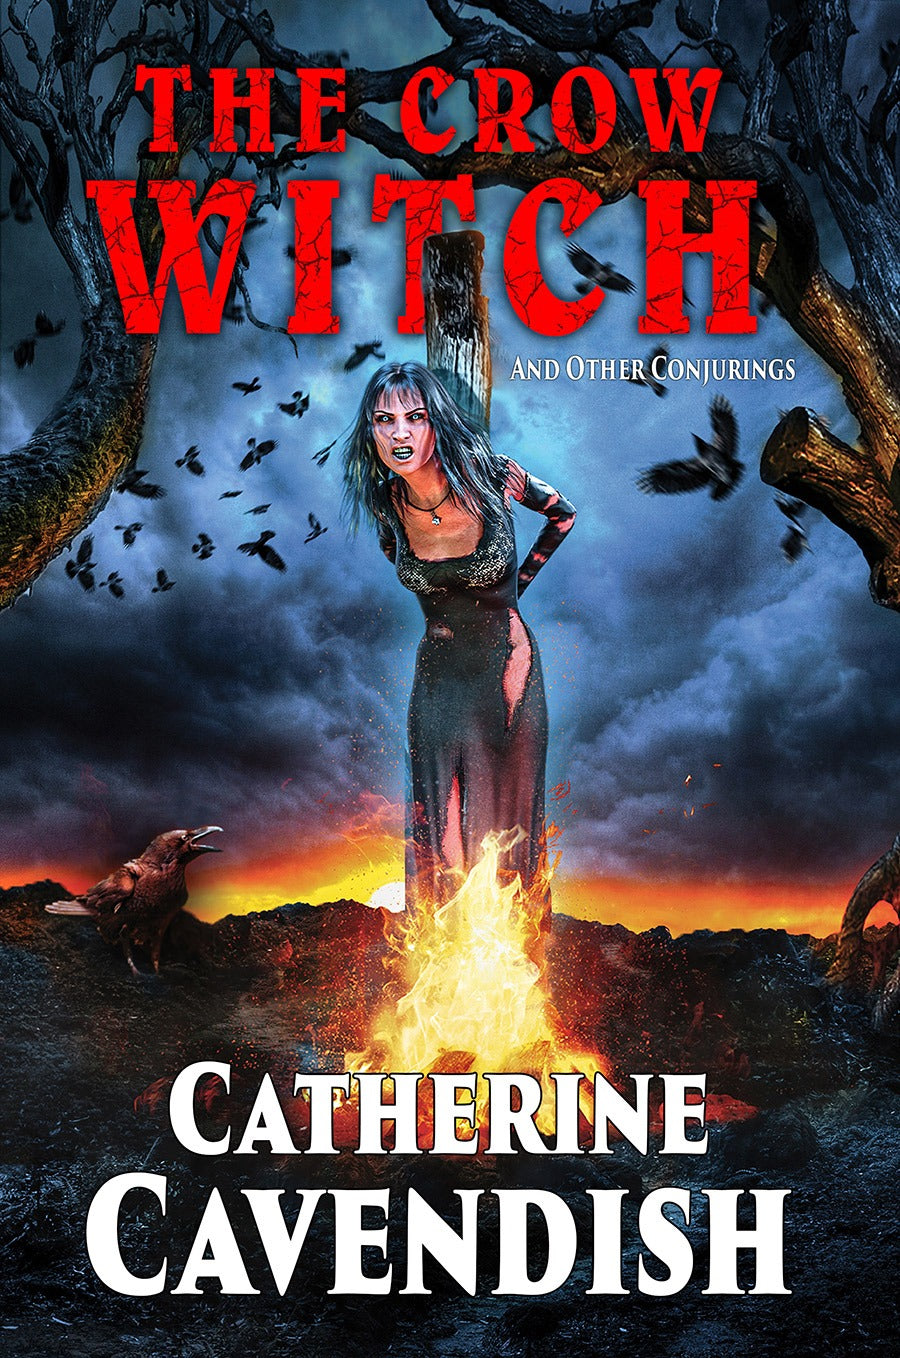 The Crow Witch and Other Conjurings by Catherine Cavendish Signed Numbered Trade Paperback